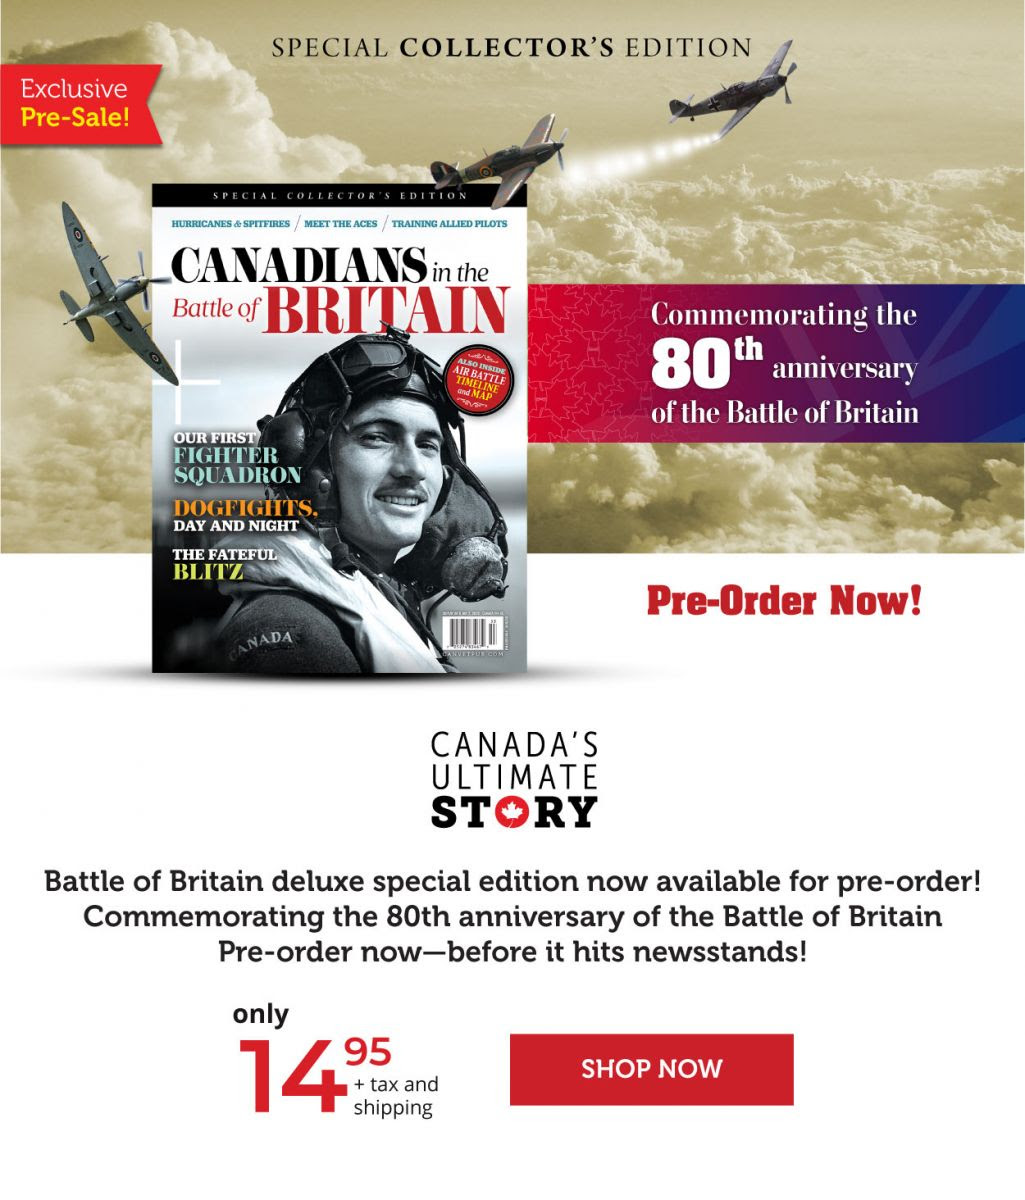 Canadians in the Battle of Britain